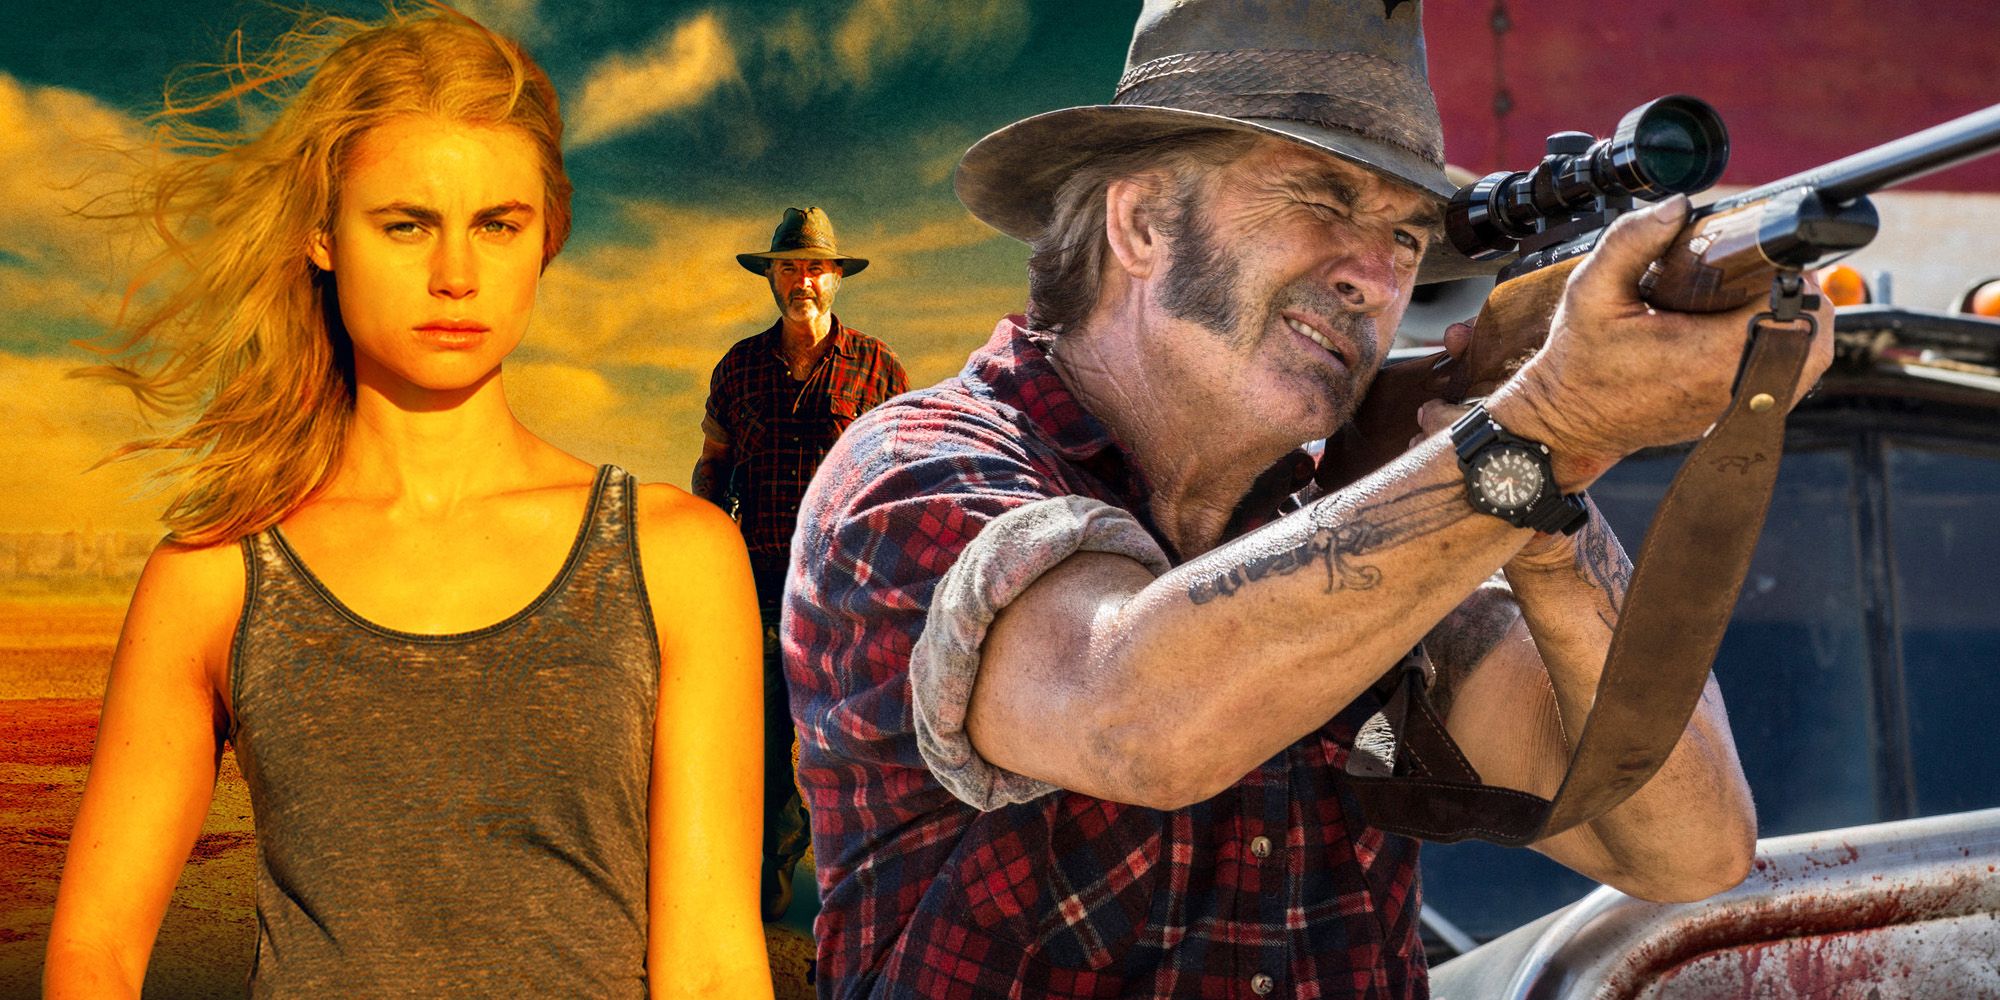 The Wolf Creek TV Show Was A Better Way To Continue The Movie Franchise